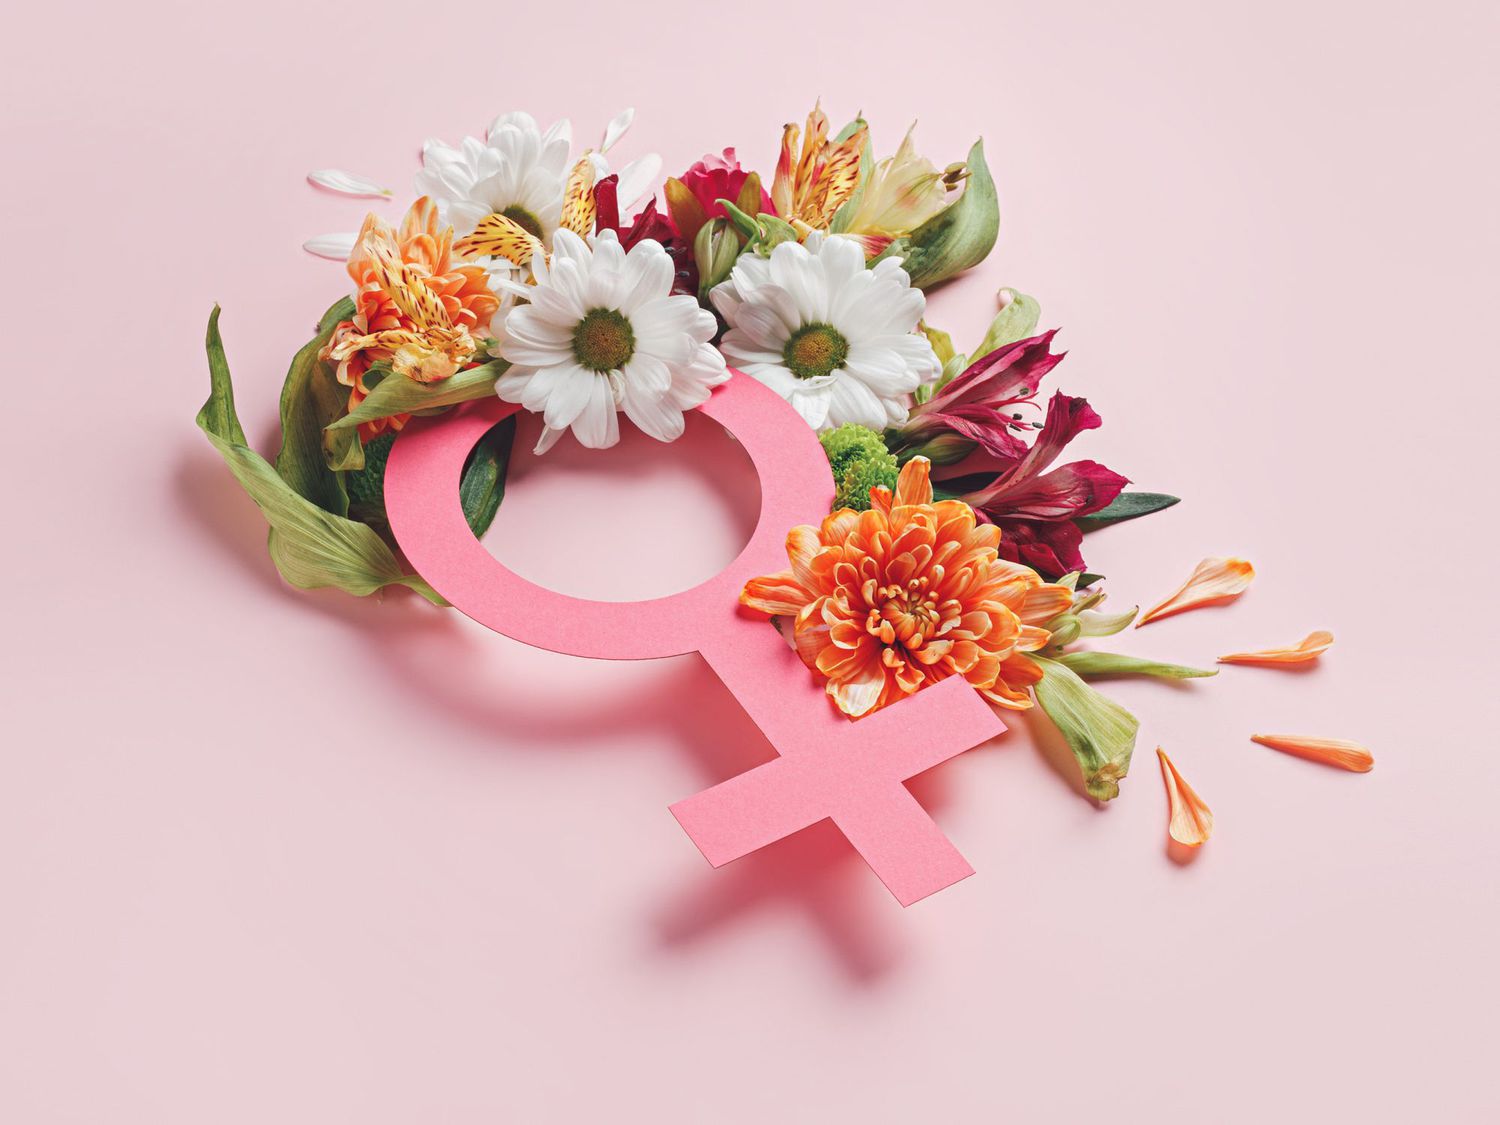 Female symbol with fresh spring flowers and leaves against pastel pink background